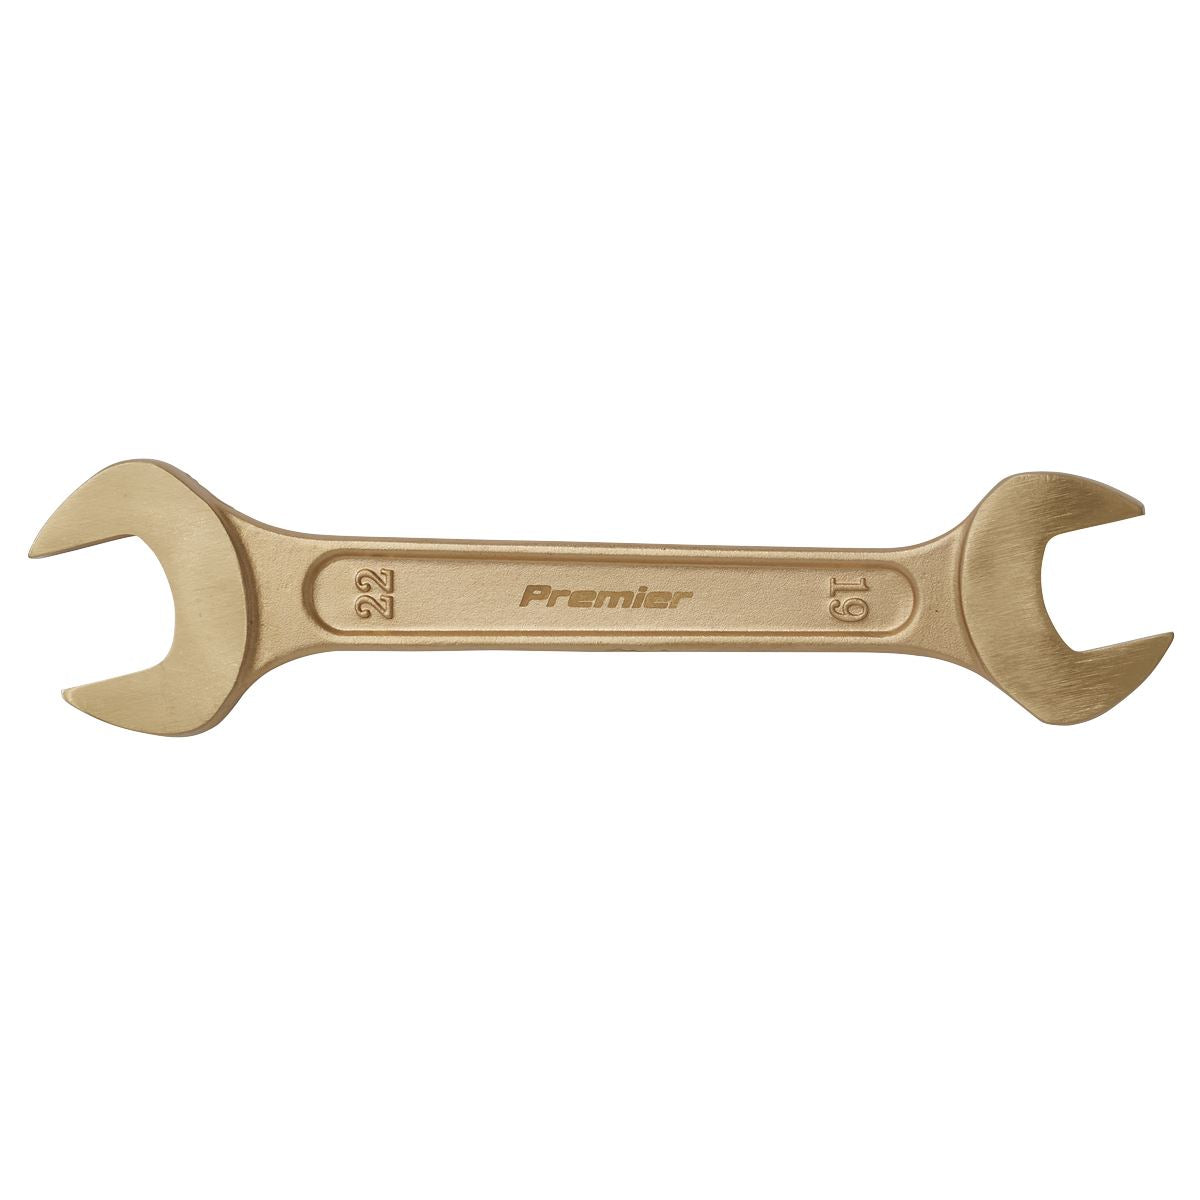 Brass/Non Spark Combination Spanner Set in Port-Harcourt - Hand Tools,  Chy-mosky Eze Global Services